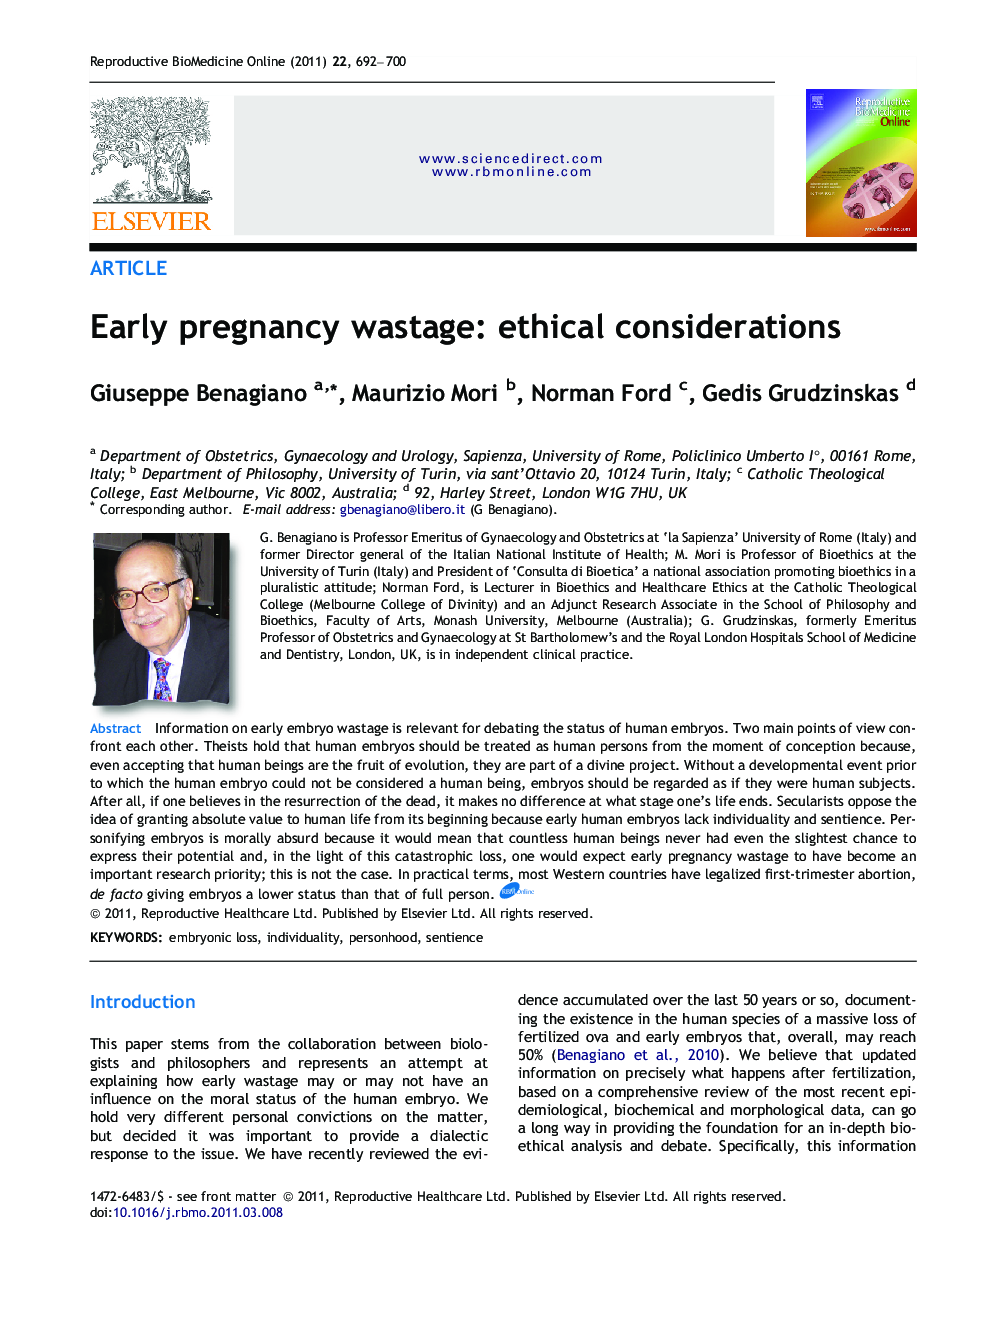 Early pregnancy wastage: ethical considerations 